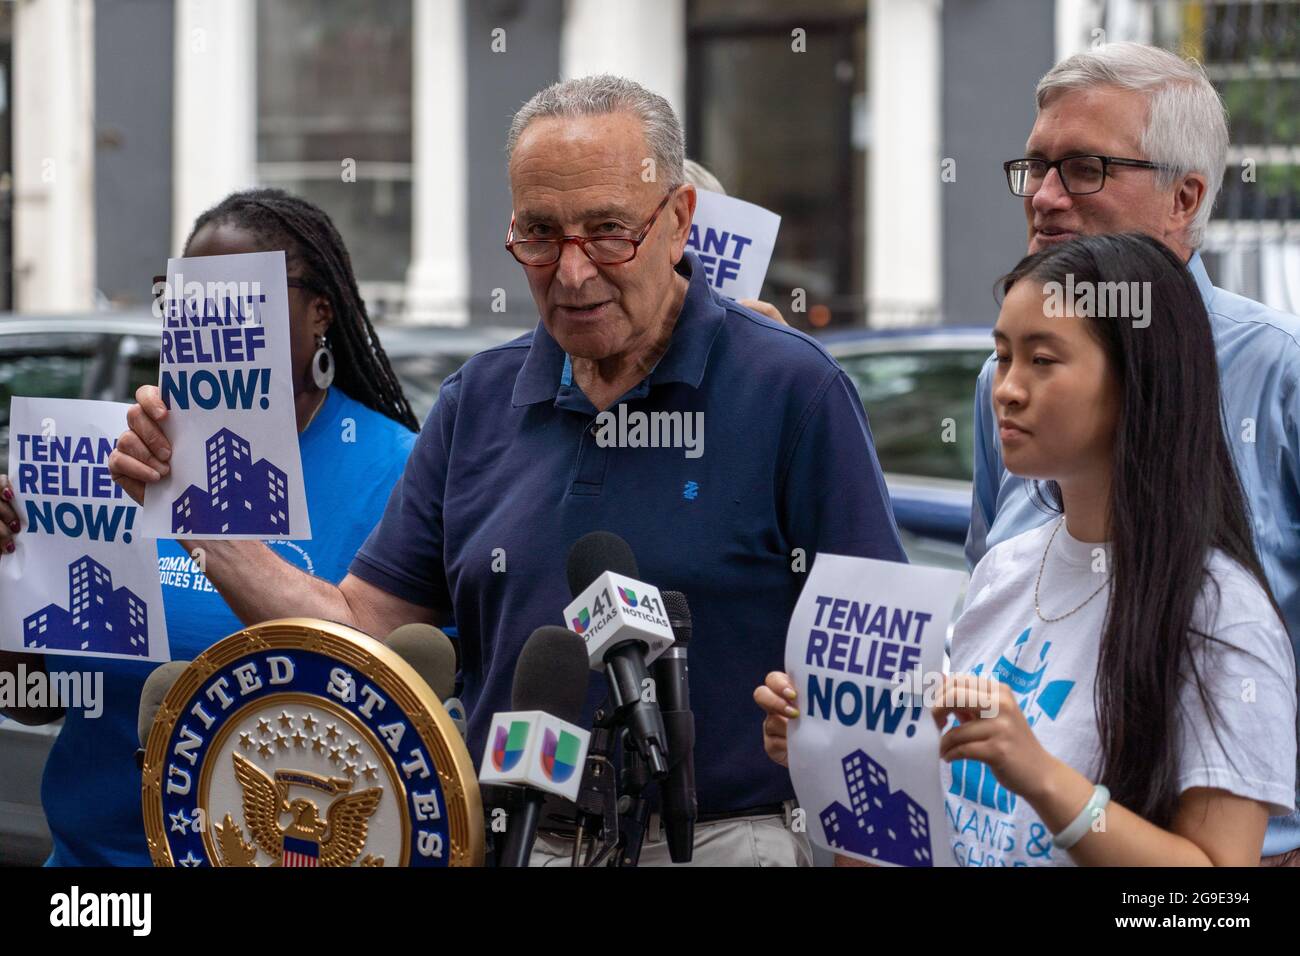 New York, United States. 25th July, 2021. Senate Majority Leader Senator Chuck Schumer (D-NY) speaks at a press conference at Hells Kitchen in New York City.Standing alongside NY State Senator Brian Kavanagh, Assembly Member Richard Gottfried and community rent activists Sen. Chuck Schumer says that the Cuomo administration is failing to disburse the $2.4 billion in rent relief meant for New York that could be lost at the end of September if state doesn't release the money to needy tenants who were hit hard during the covid-19 pandemic. Credit: SOPA Images Limited/Alamy Live News Stock Photo